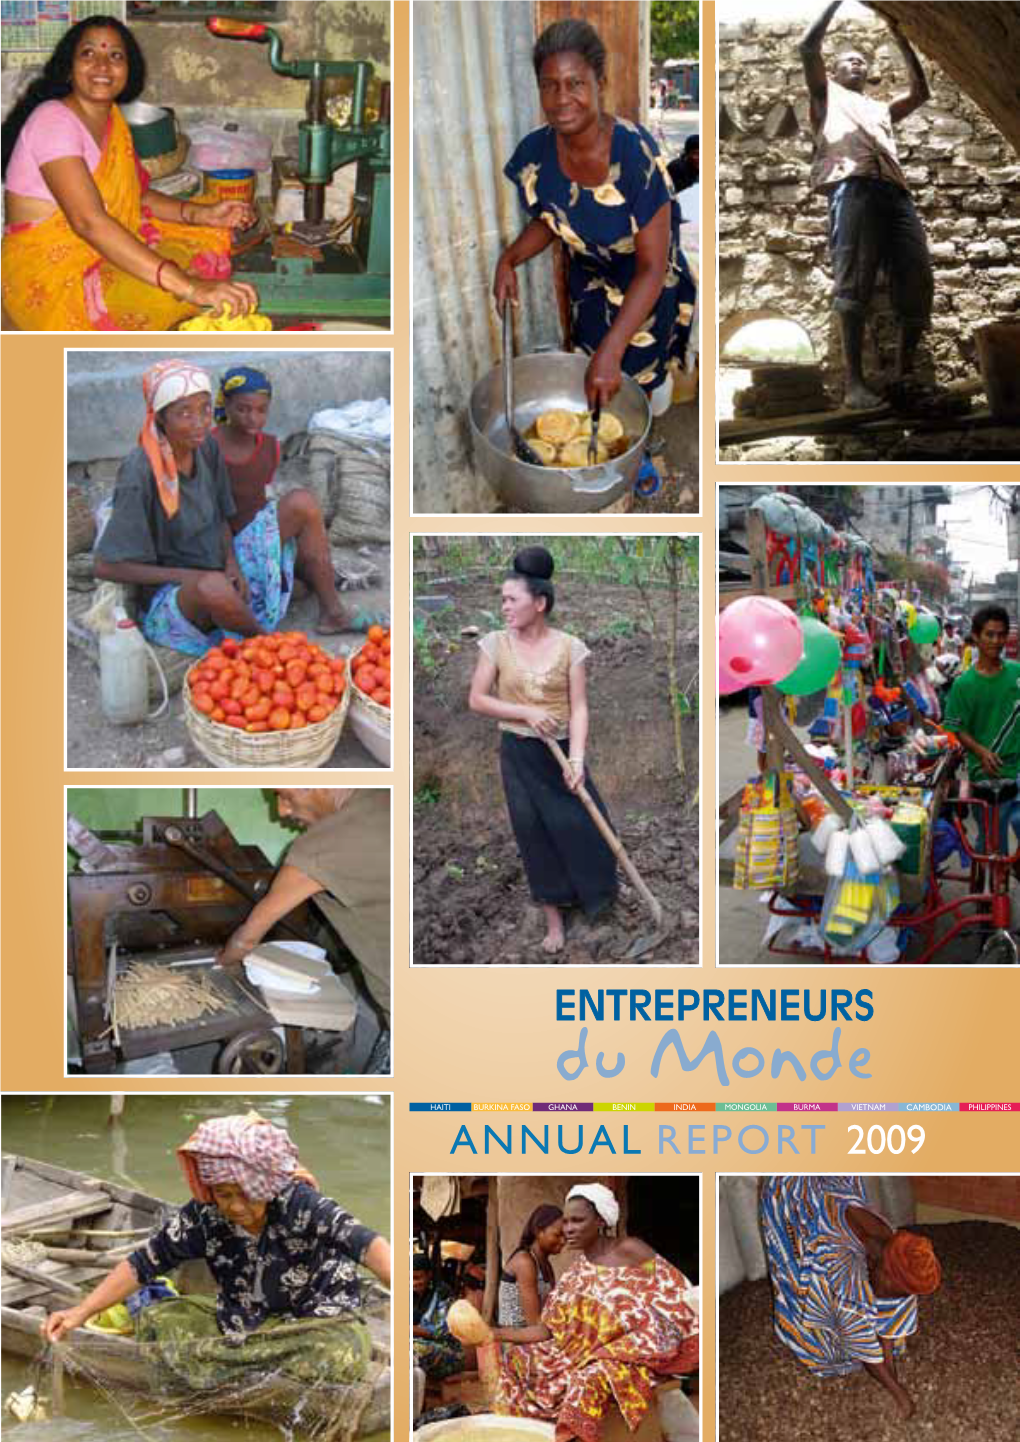 Annual Report 2009 Key Figures